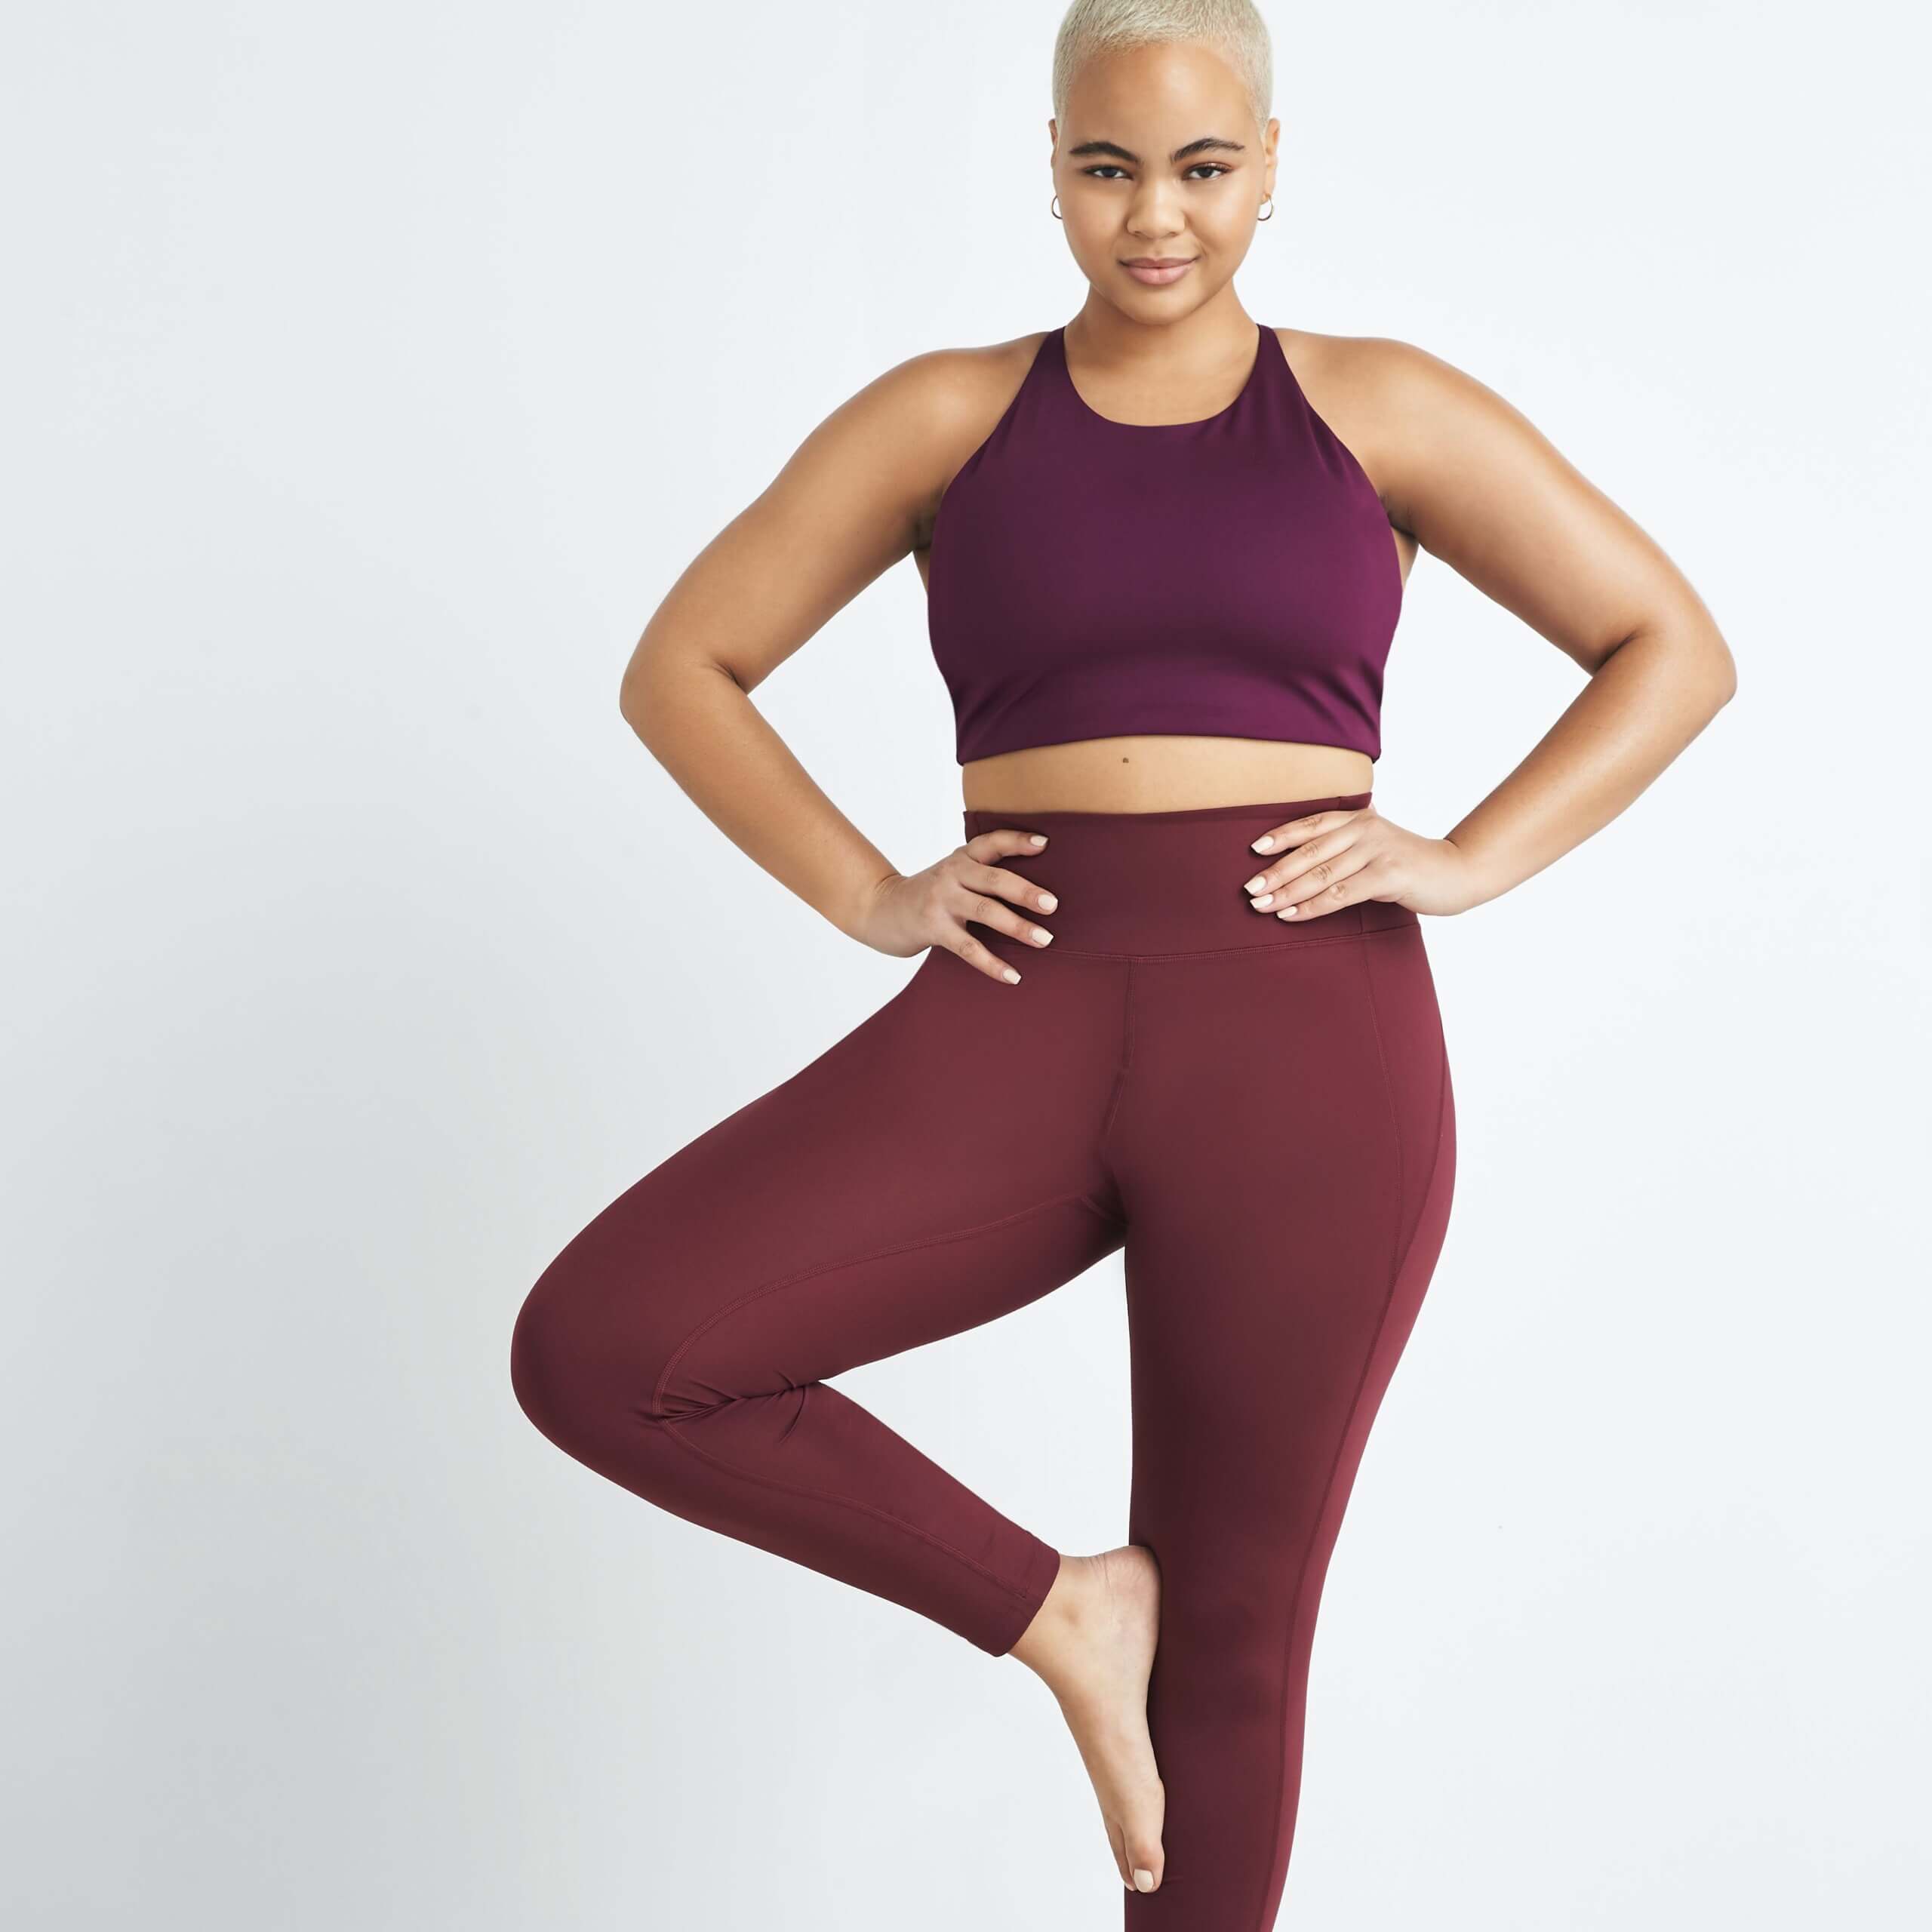 What to Wear to Yoga: Learn the Basics from A to Zen